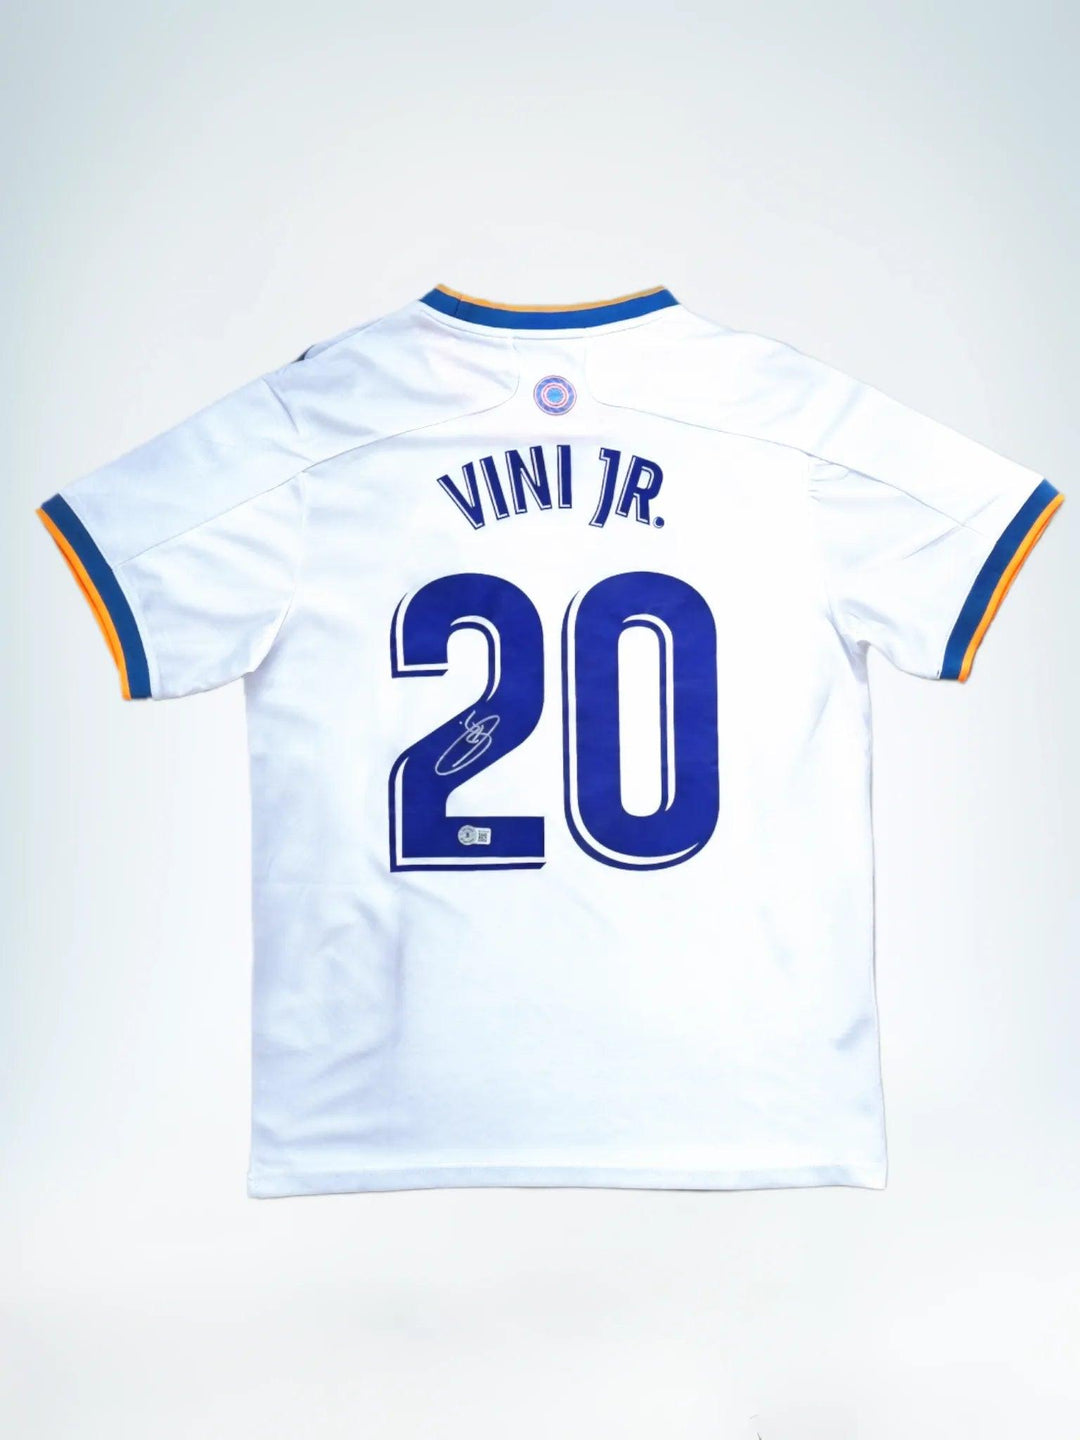 Vinicius Jr 20 Real Madrid 2021-2022 Home - Signed Soccer Shirt | Future of Madridismo